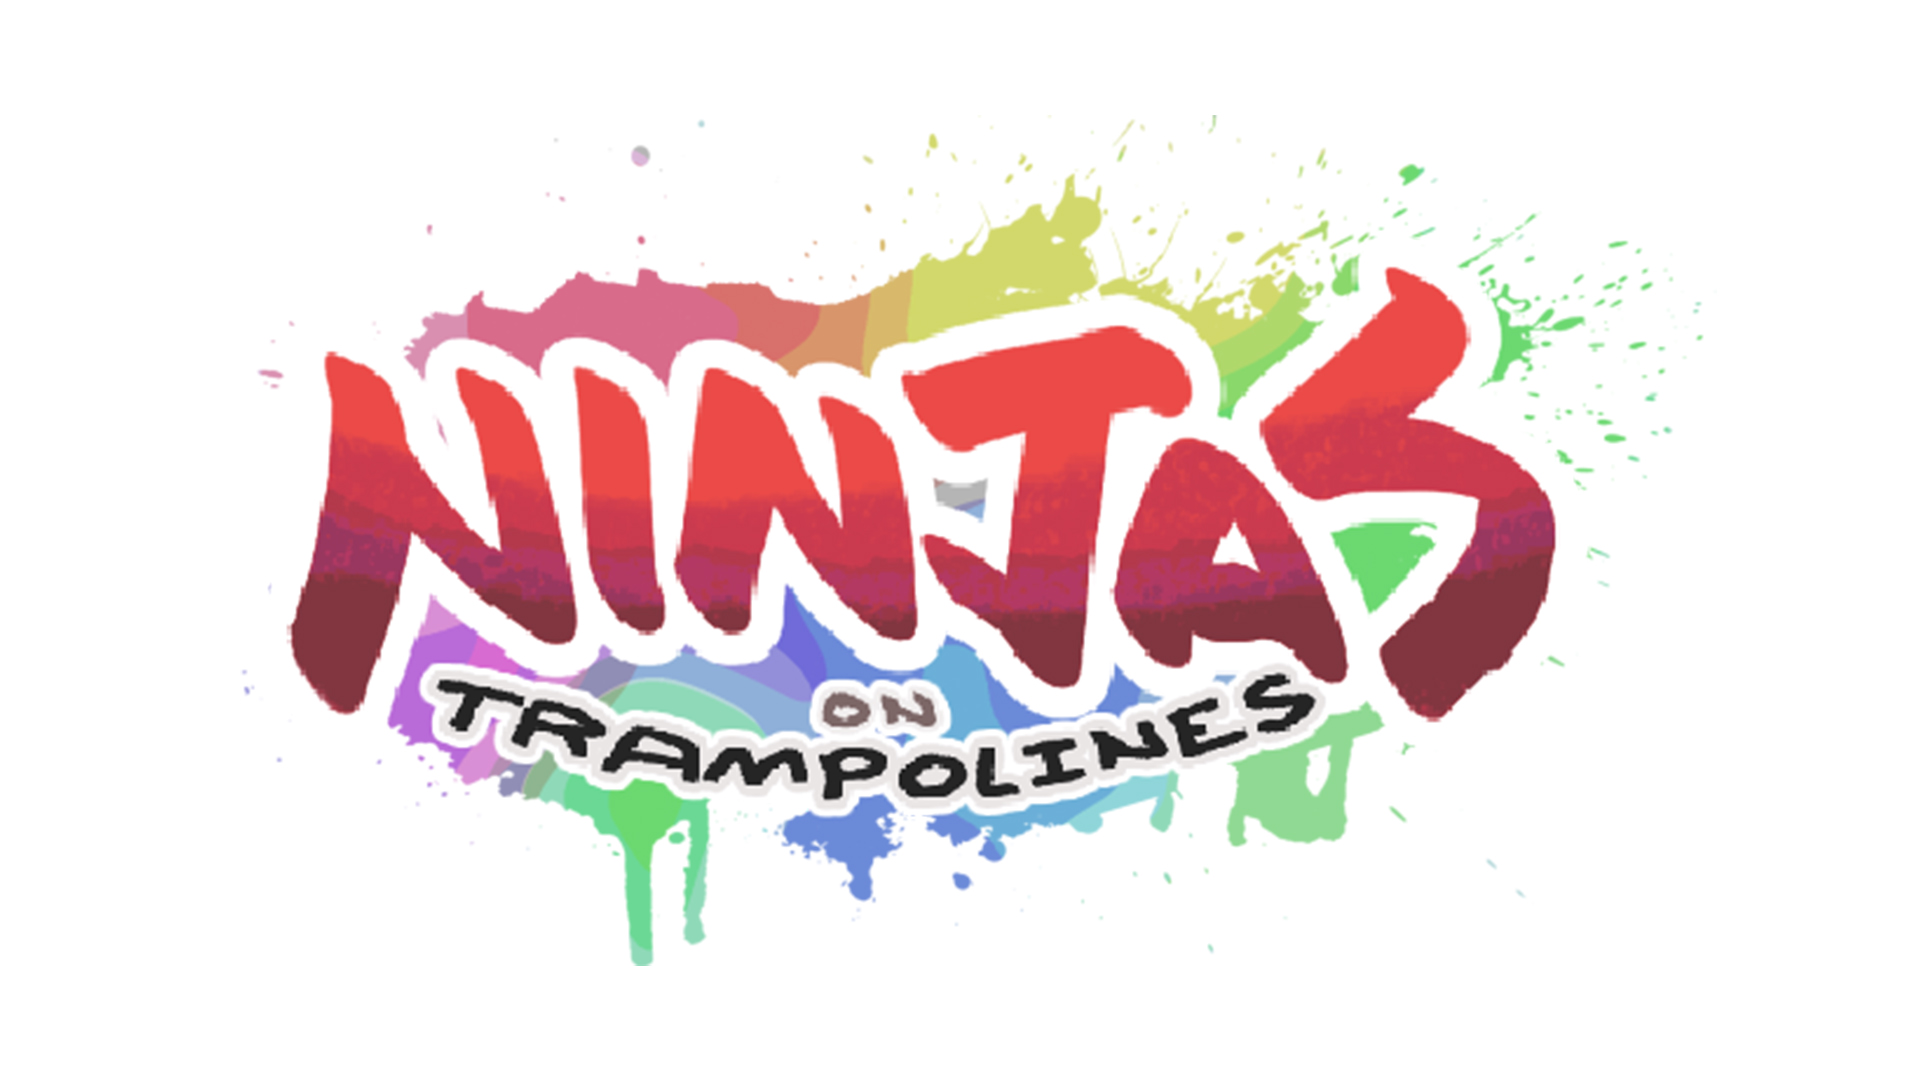 splattered paint text says ninjas on trampolines on white background